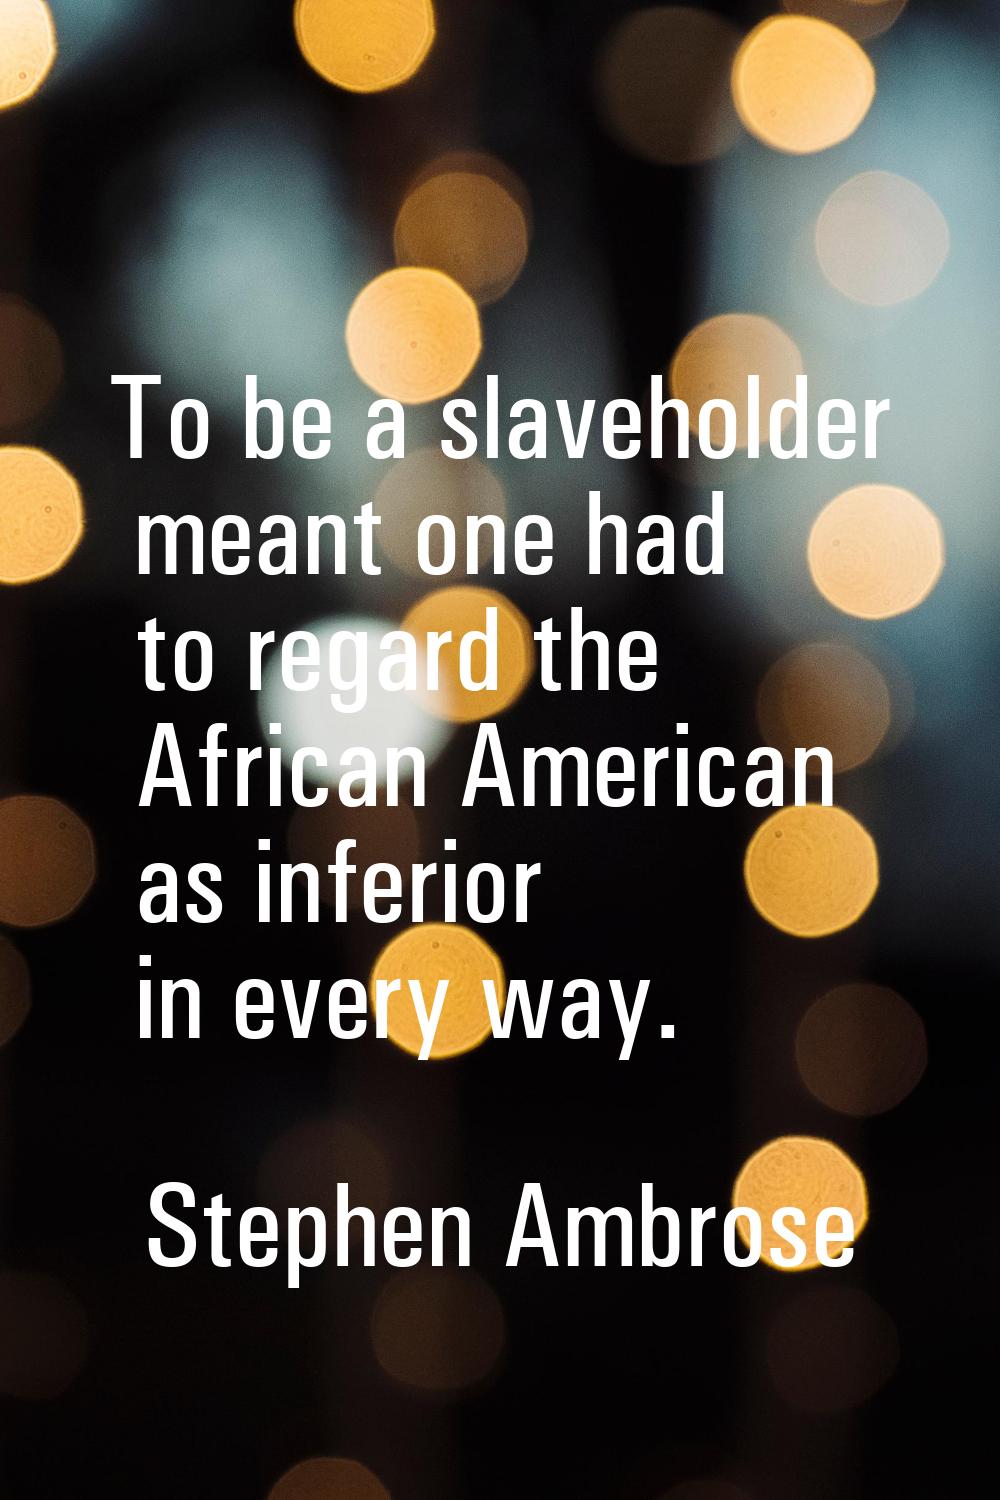 To be a slaveholder meant one had to regard the African American as inferior in every way.